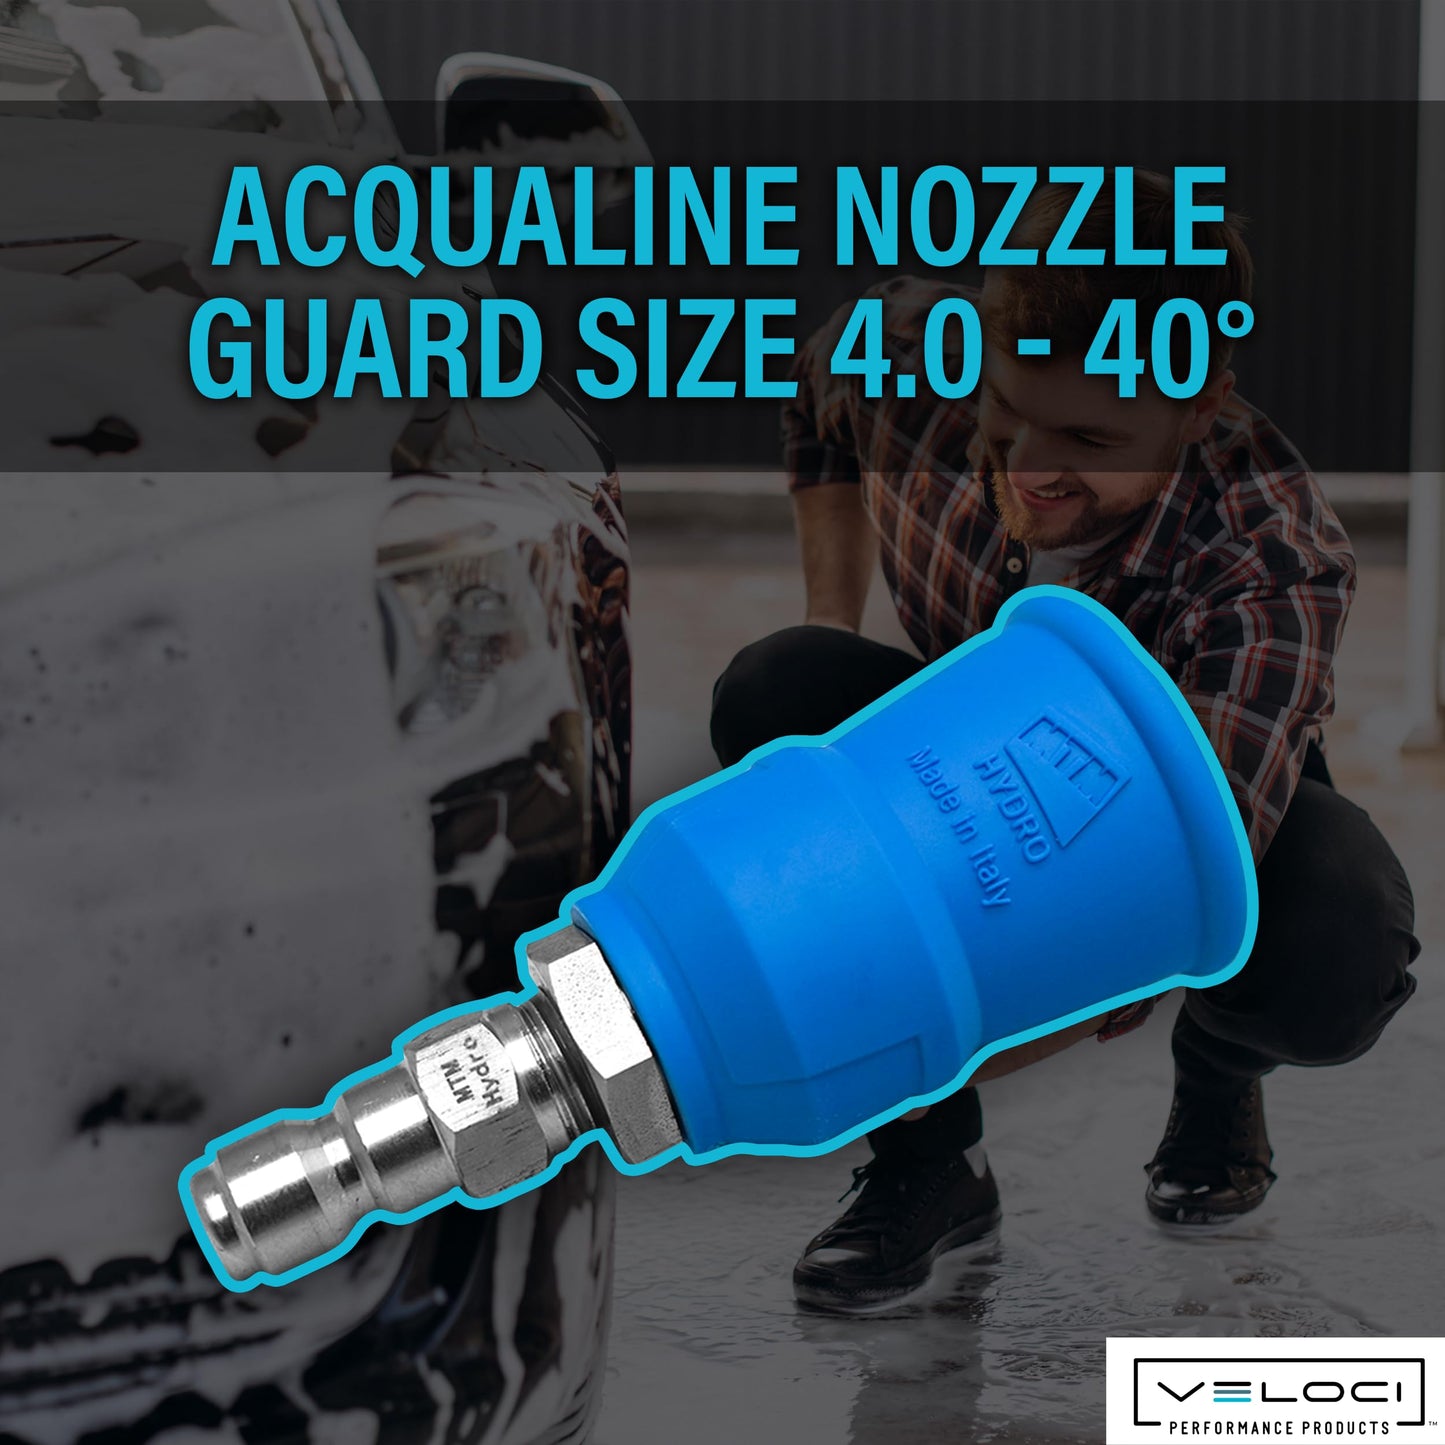 MTM Hydro Acqualine Pressure Washer Nozzle Guard Holder Tips Protector with 1/4? Quick Coupler Plug, 40 Degrees 4.0